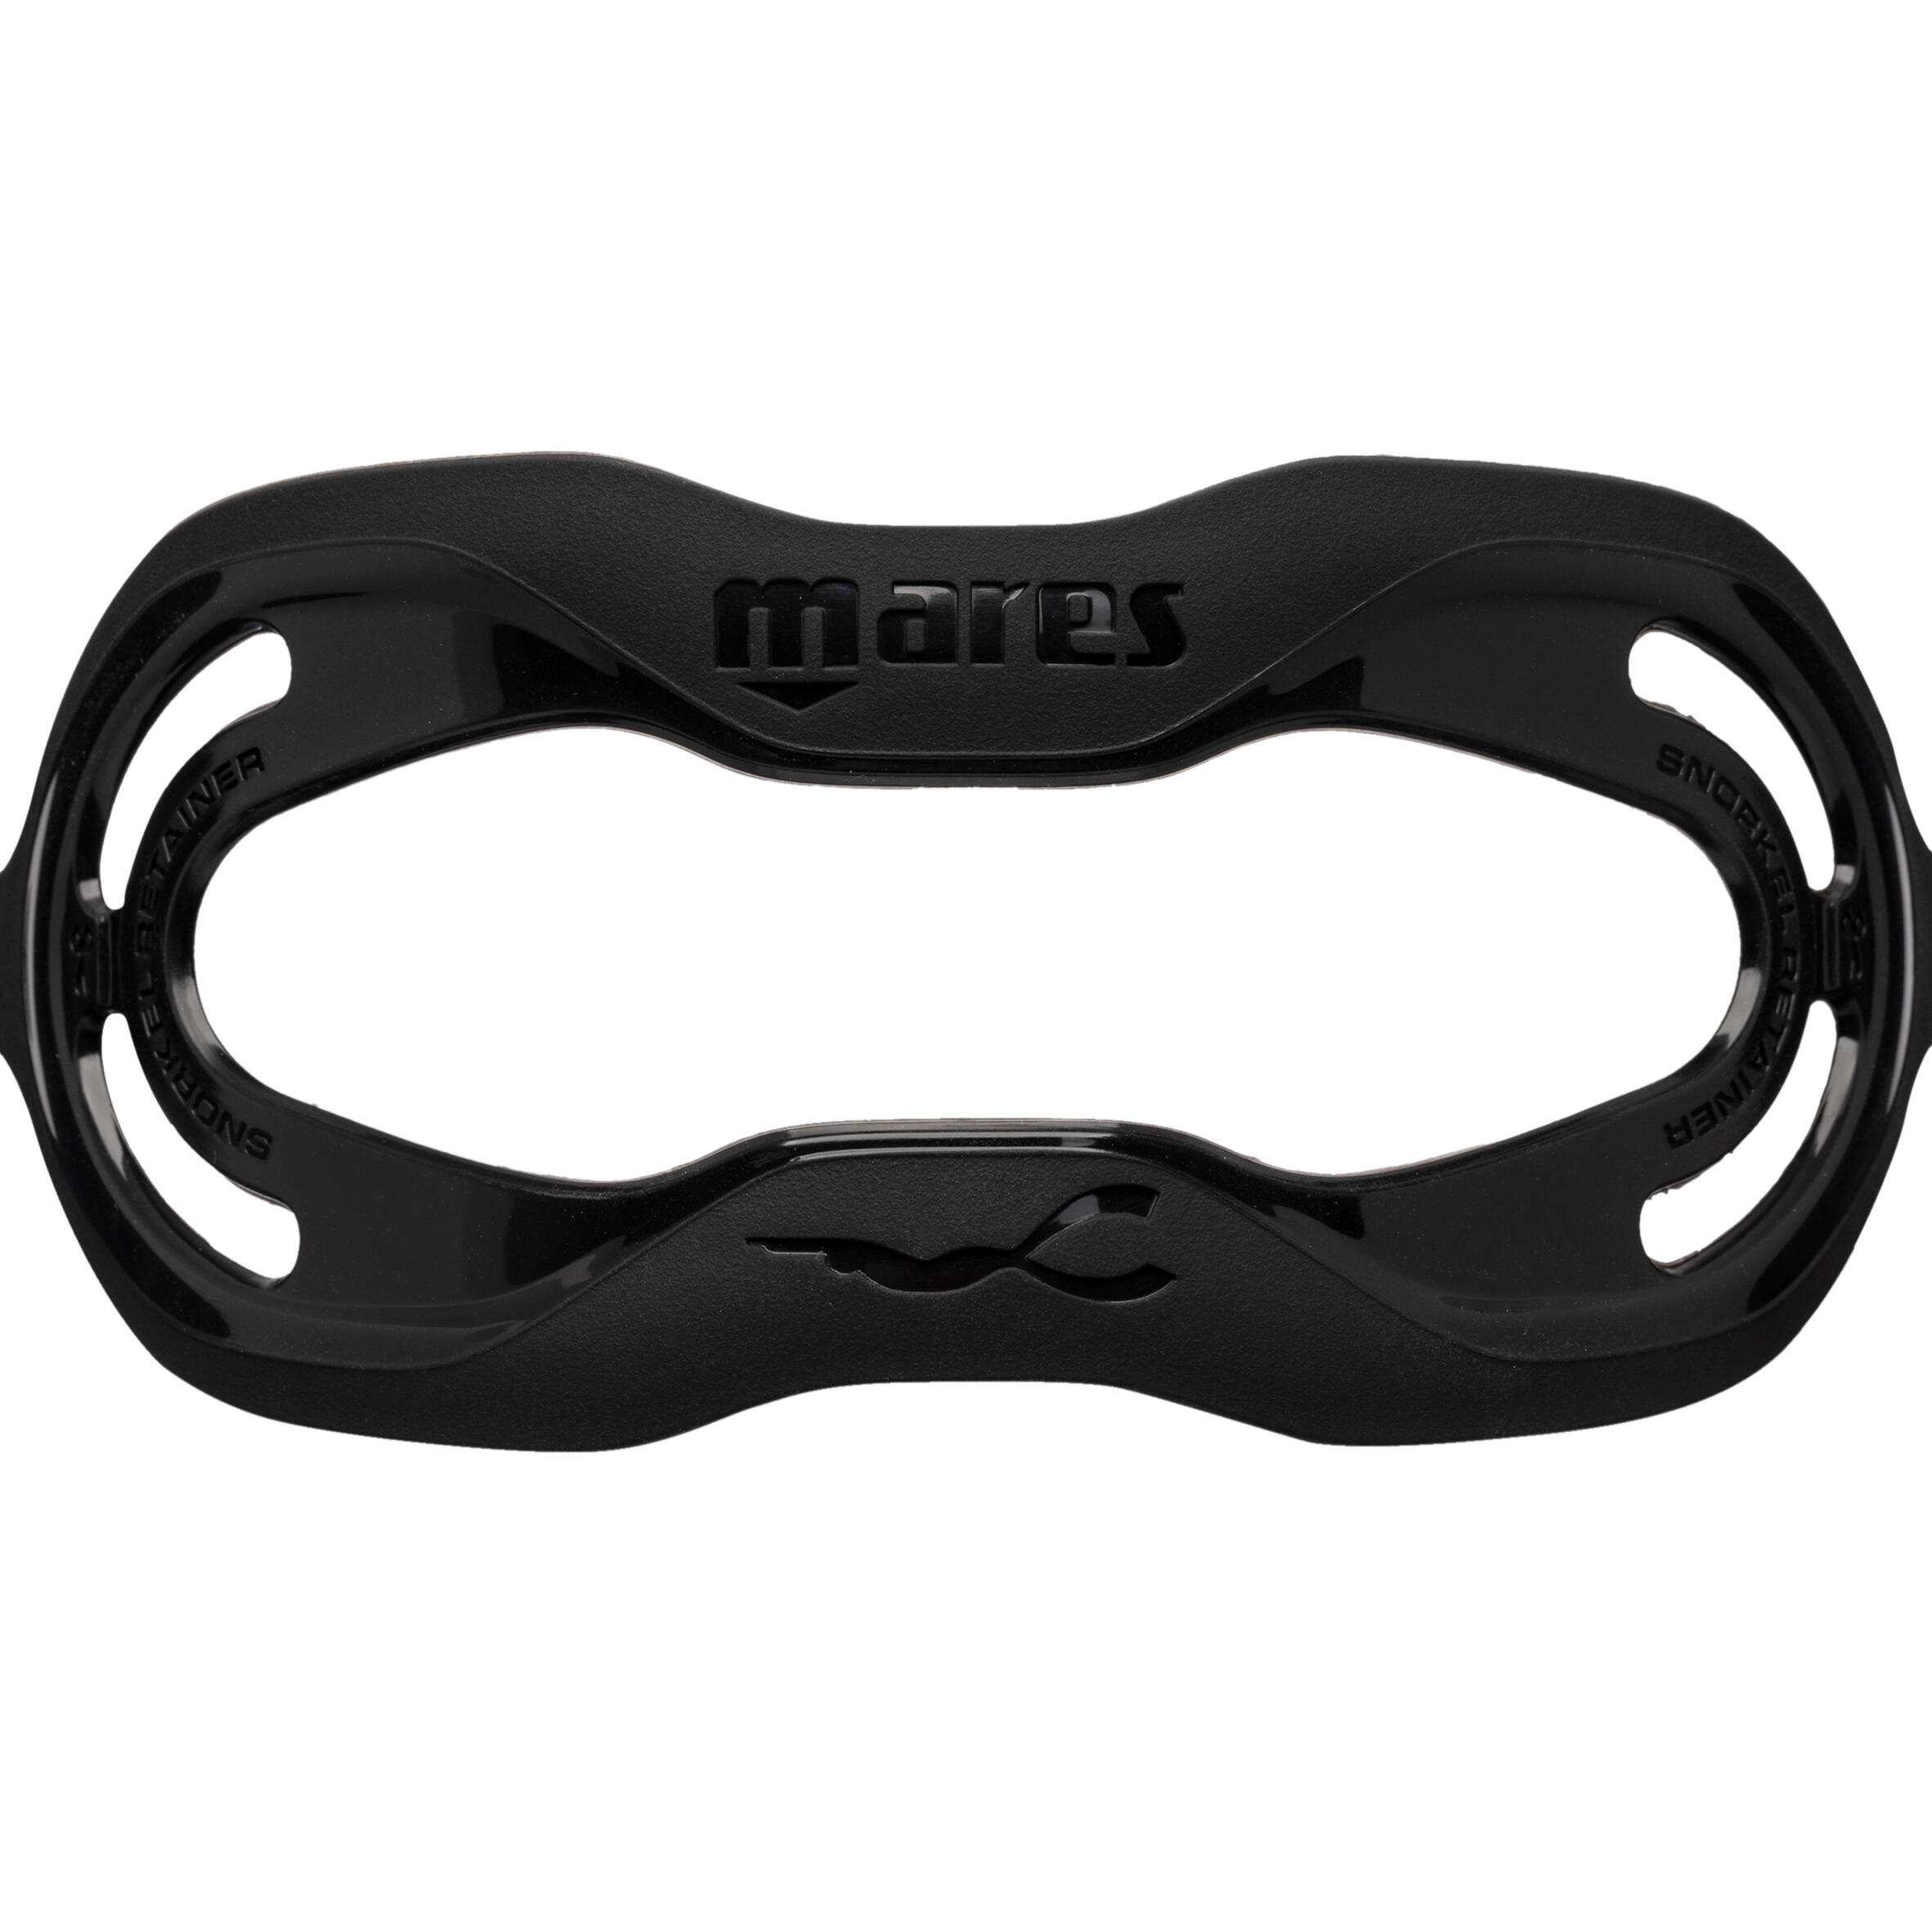 Freediving and Spearfishing Mask X-STREAM - Black 5/9